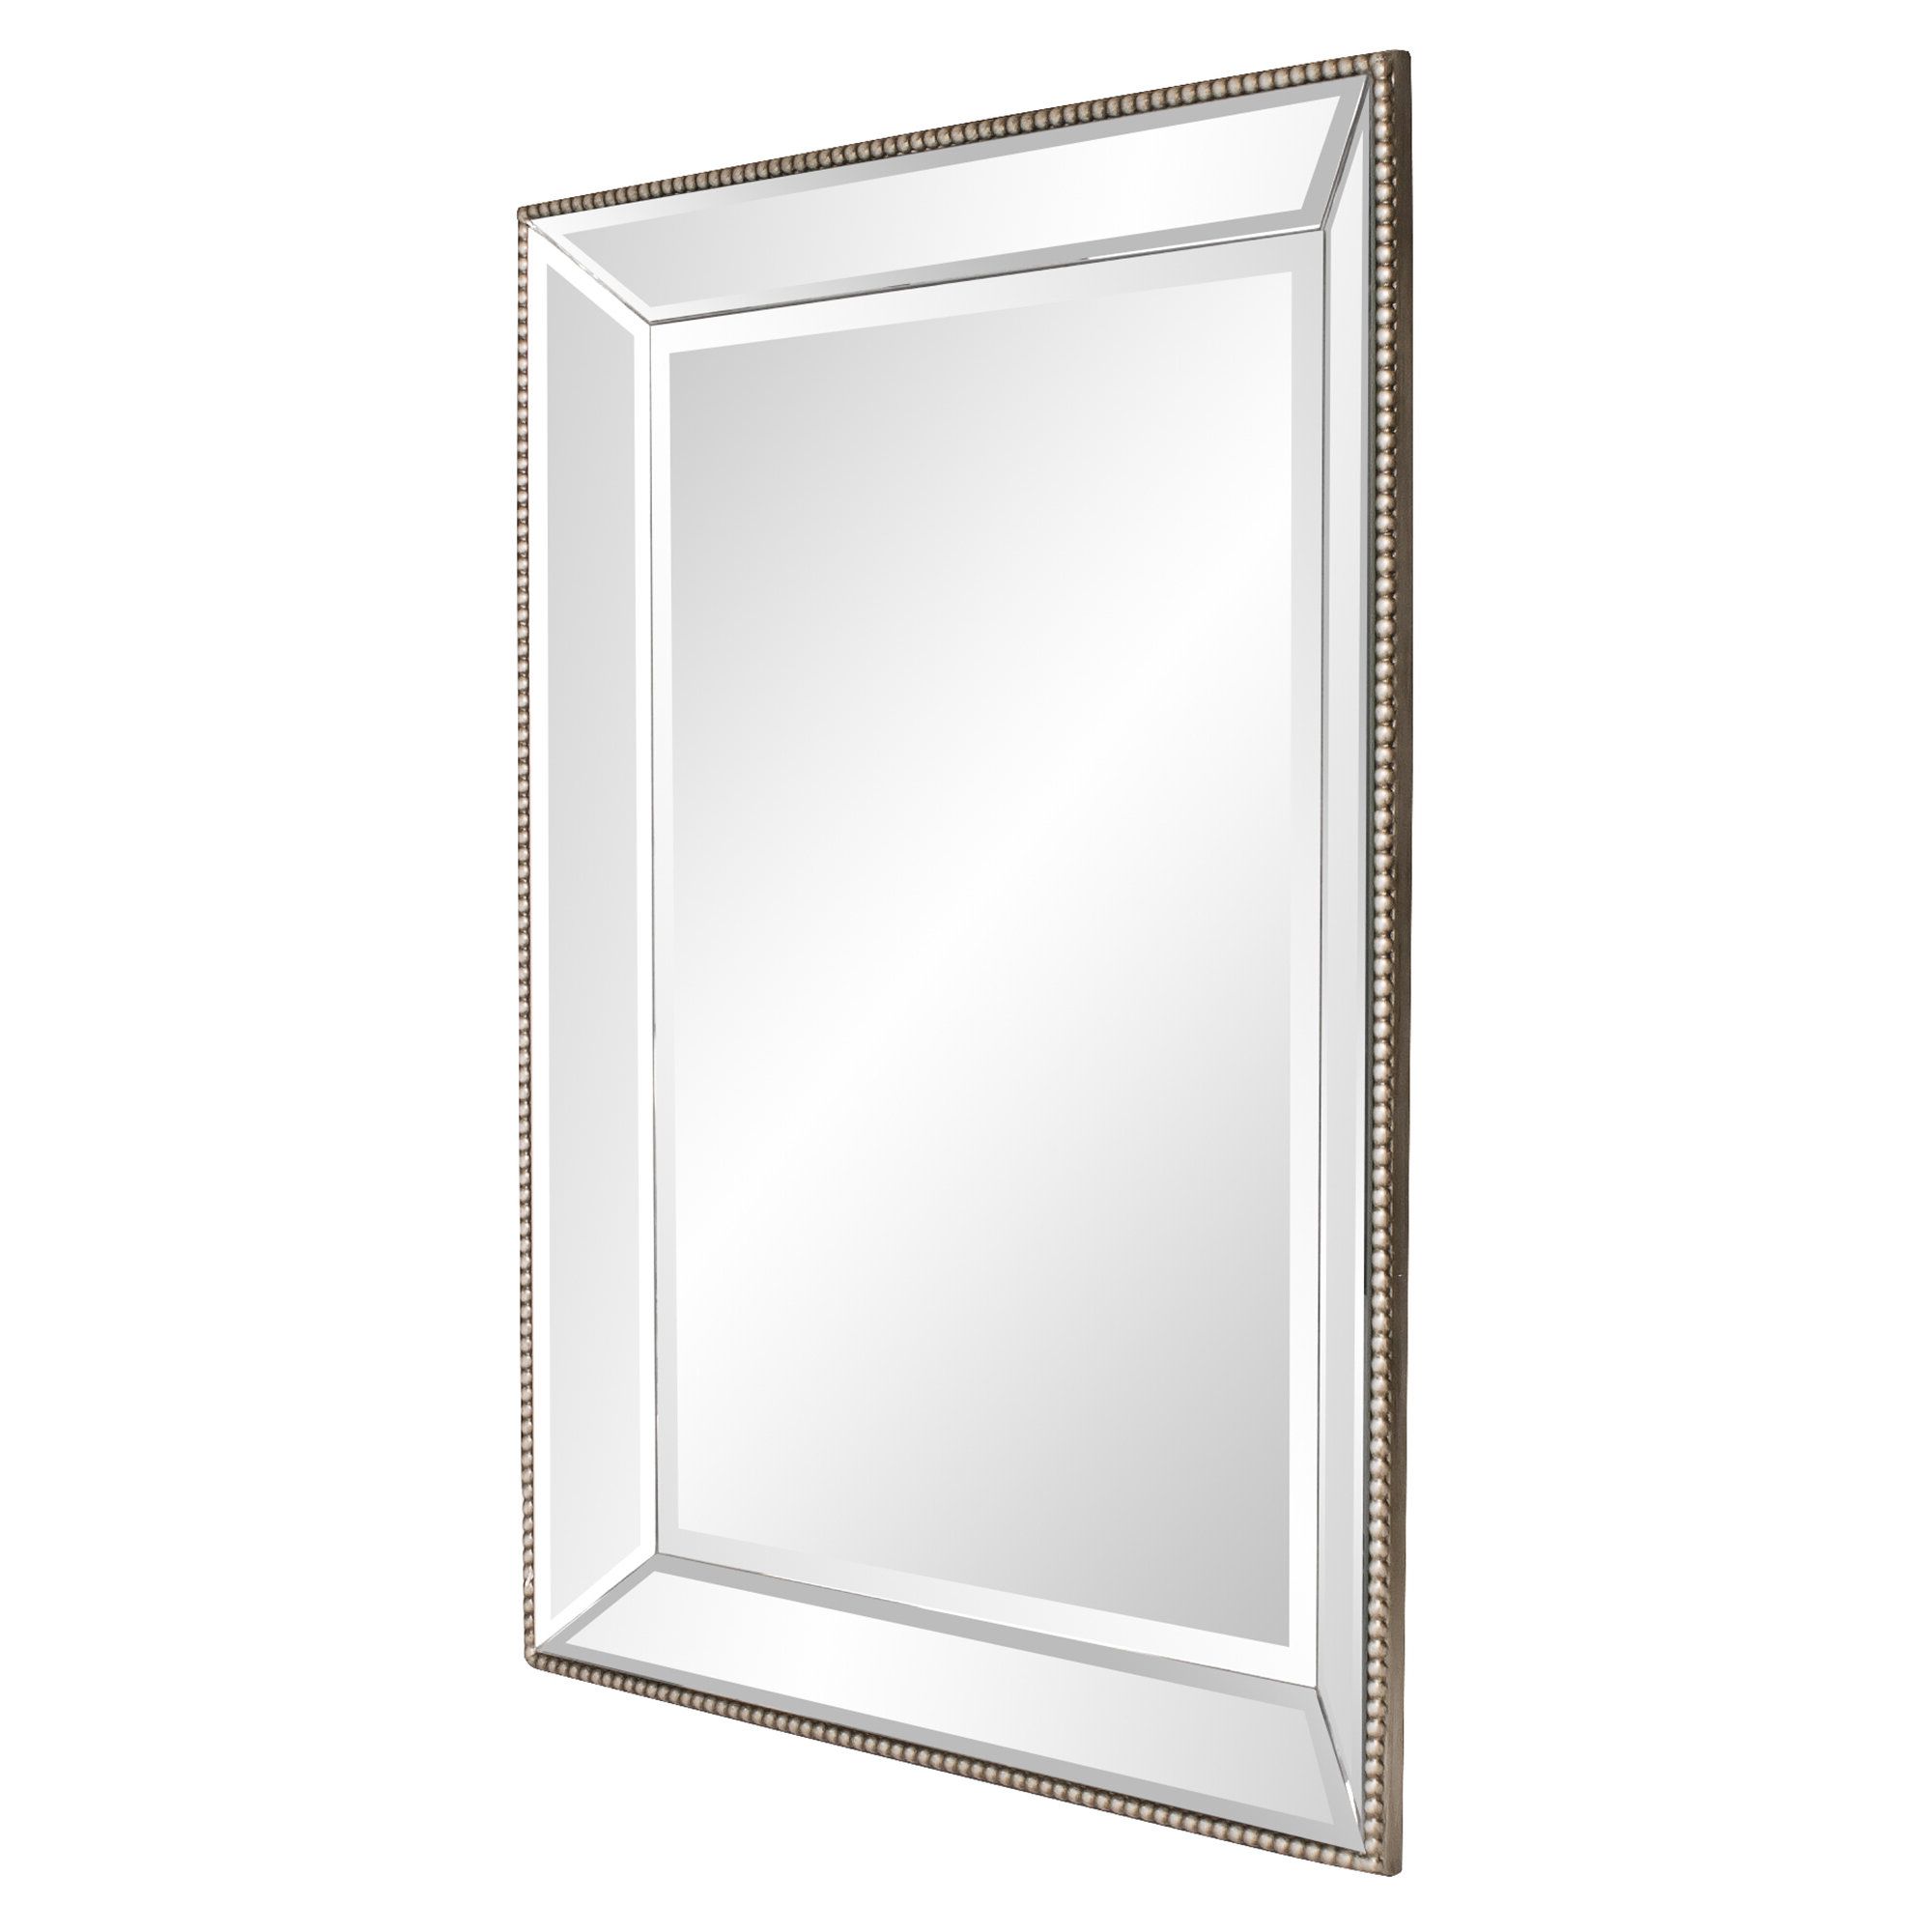 Current Mirrored Frame Wall Mirror Intended For Wall Mirror With Mirror Frame (View 12 of 20)